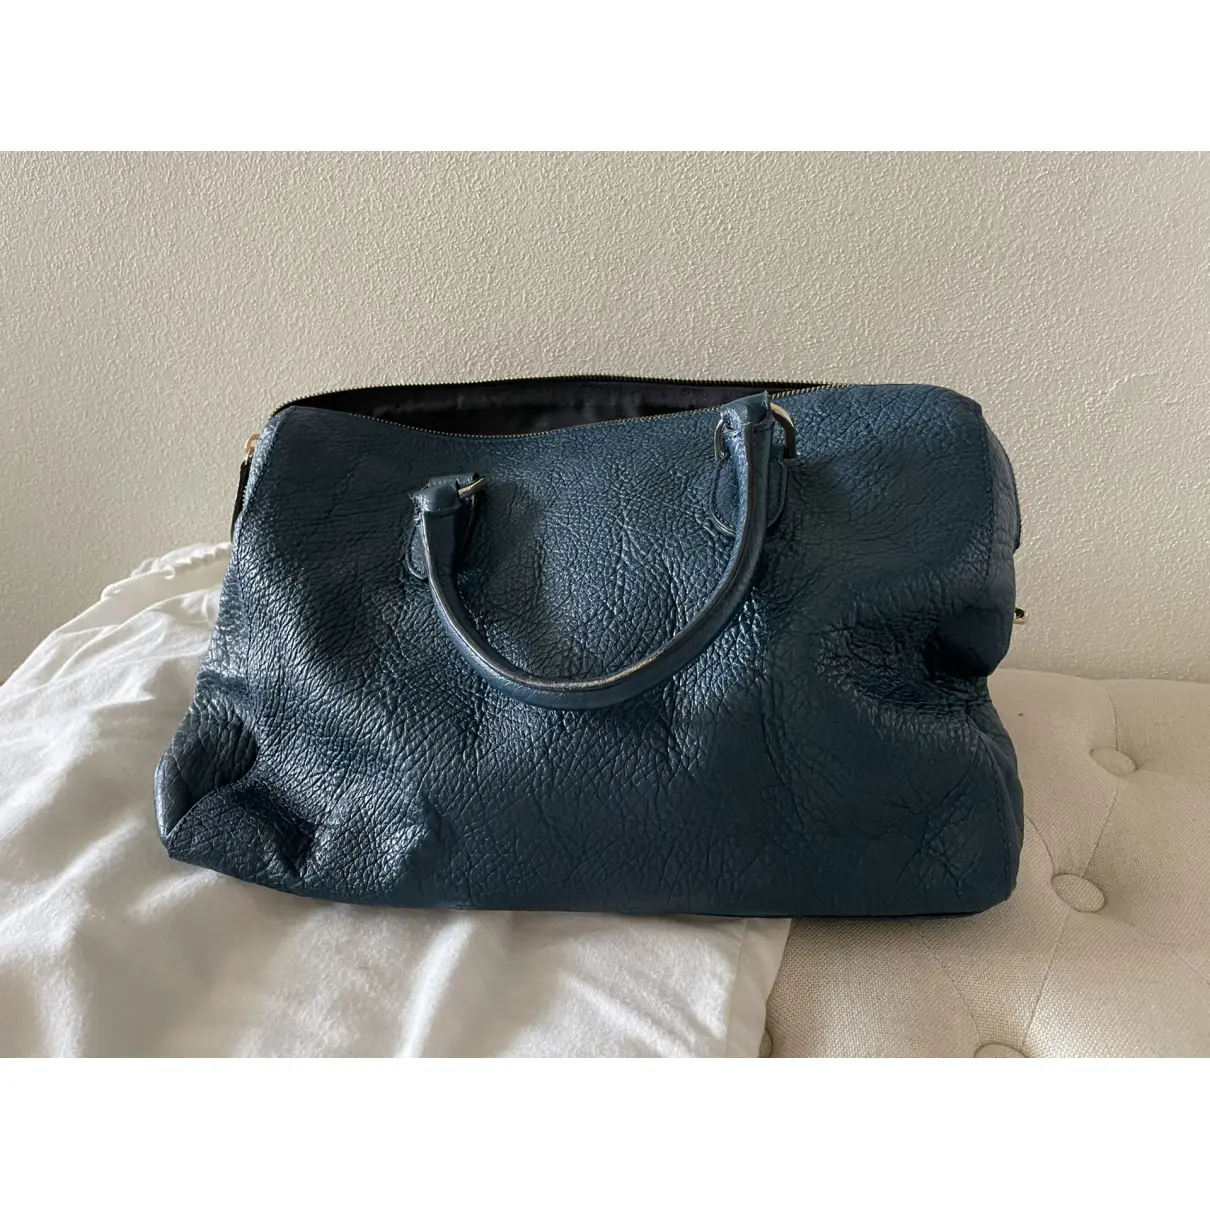 Del Rey leather bag Mulberry